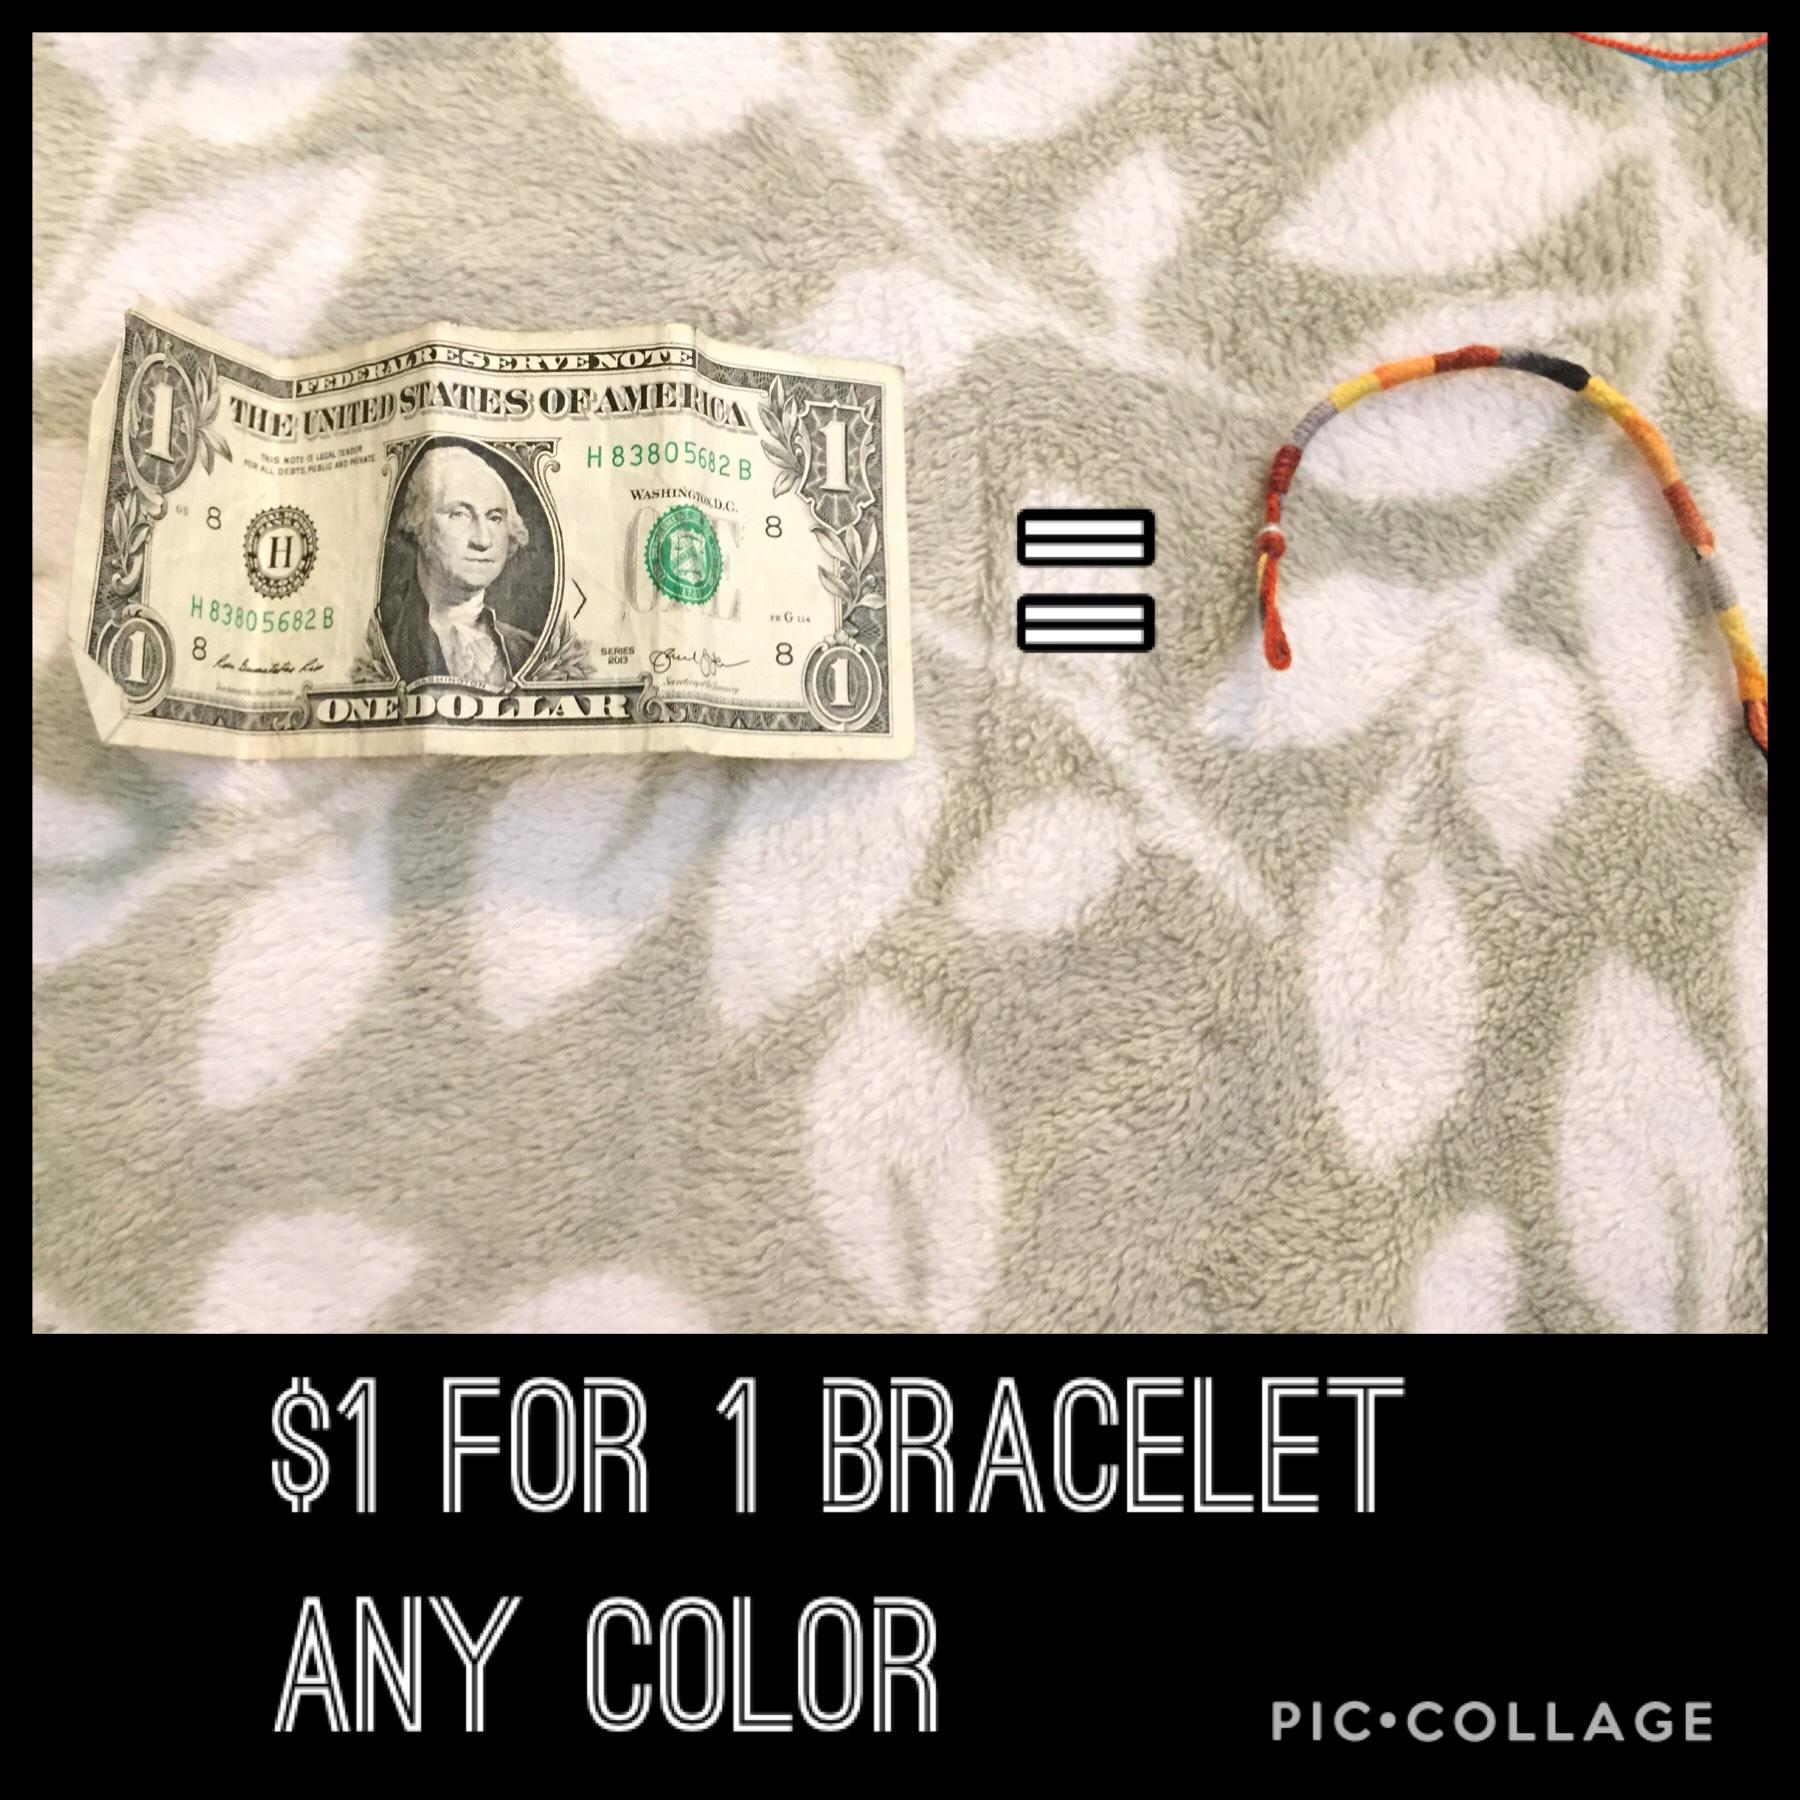 $1 for 1 bracelet that is any color!!!